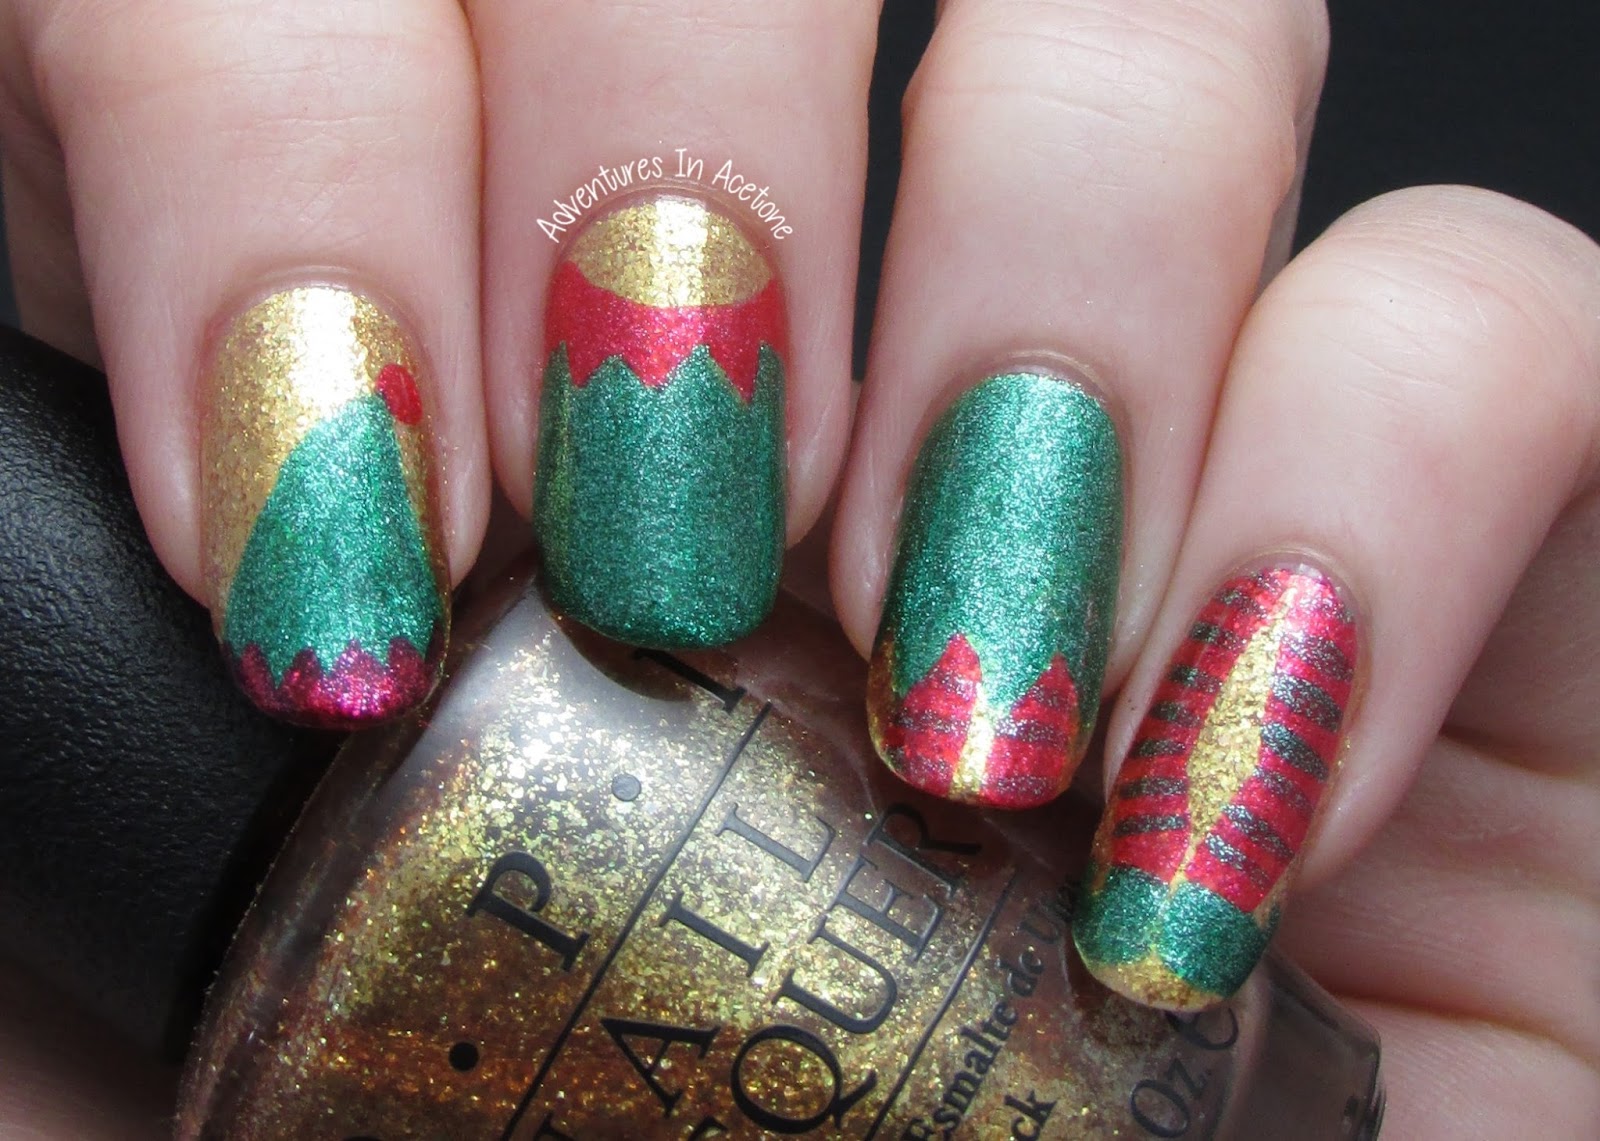 8. "Sparkly Reindeer Short Gel Nail Design for a Fun Christmas Twist" - wide 2